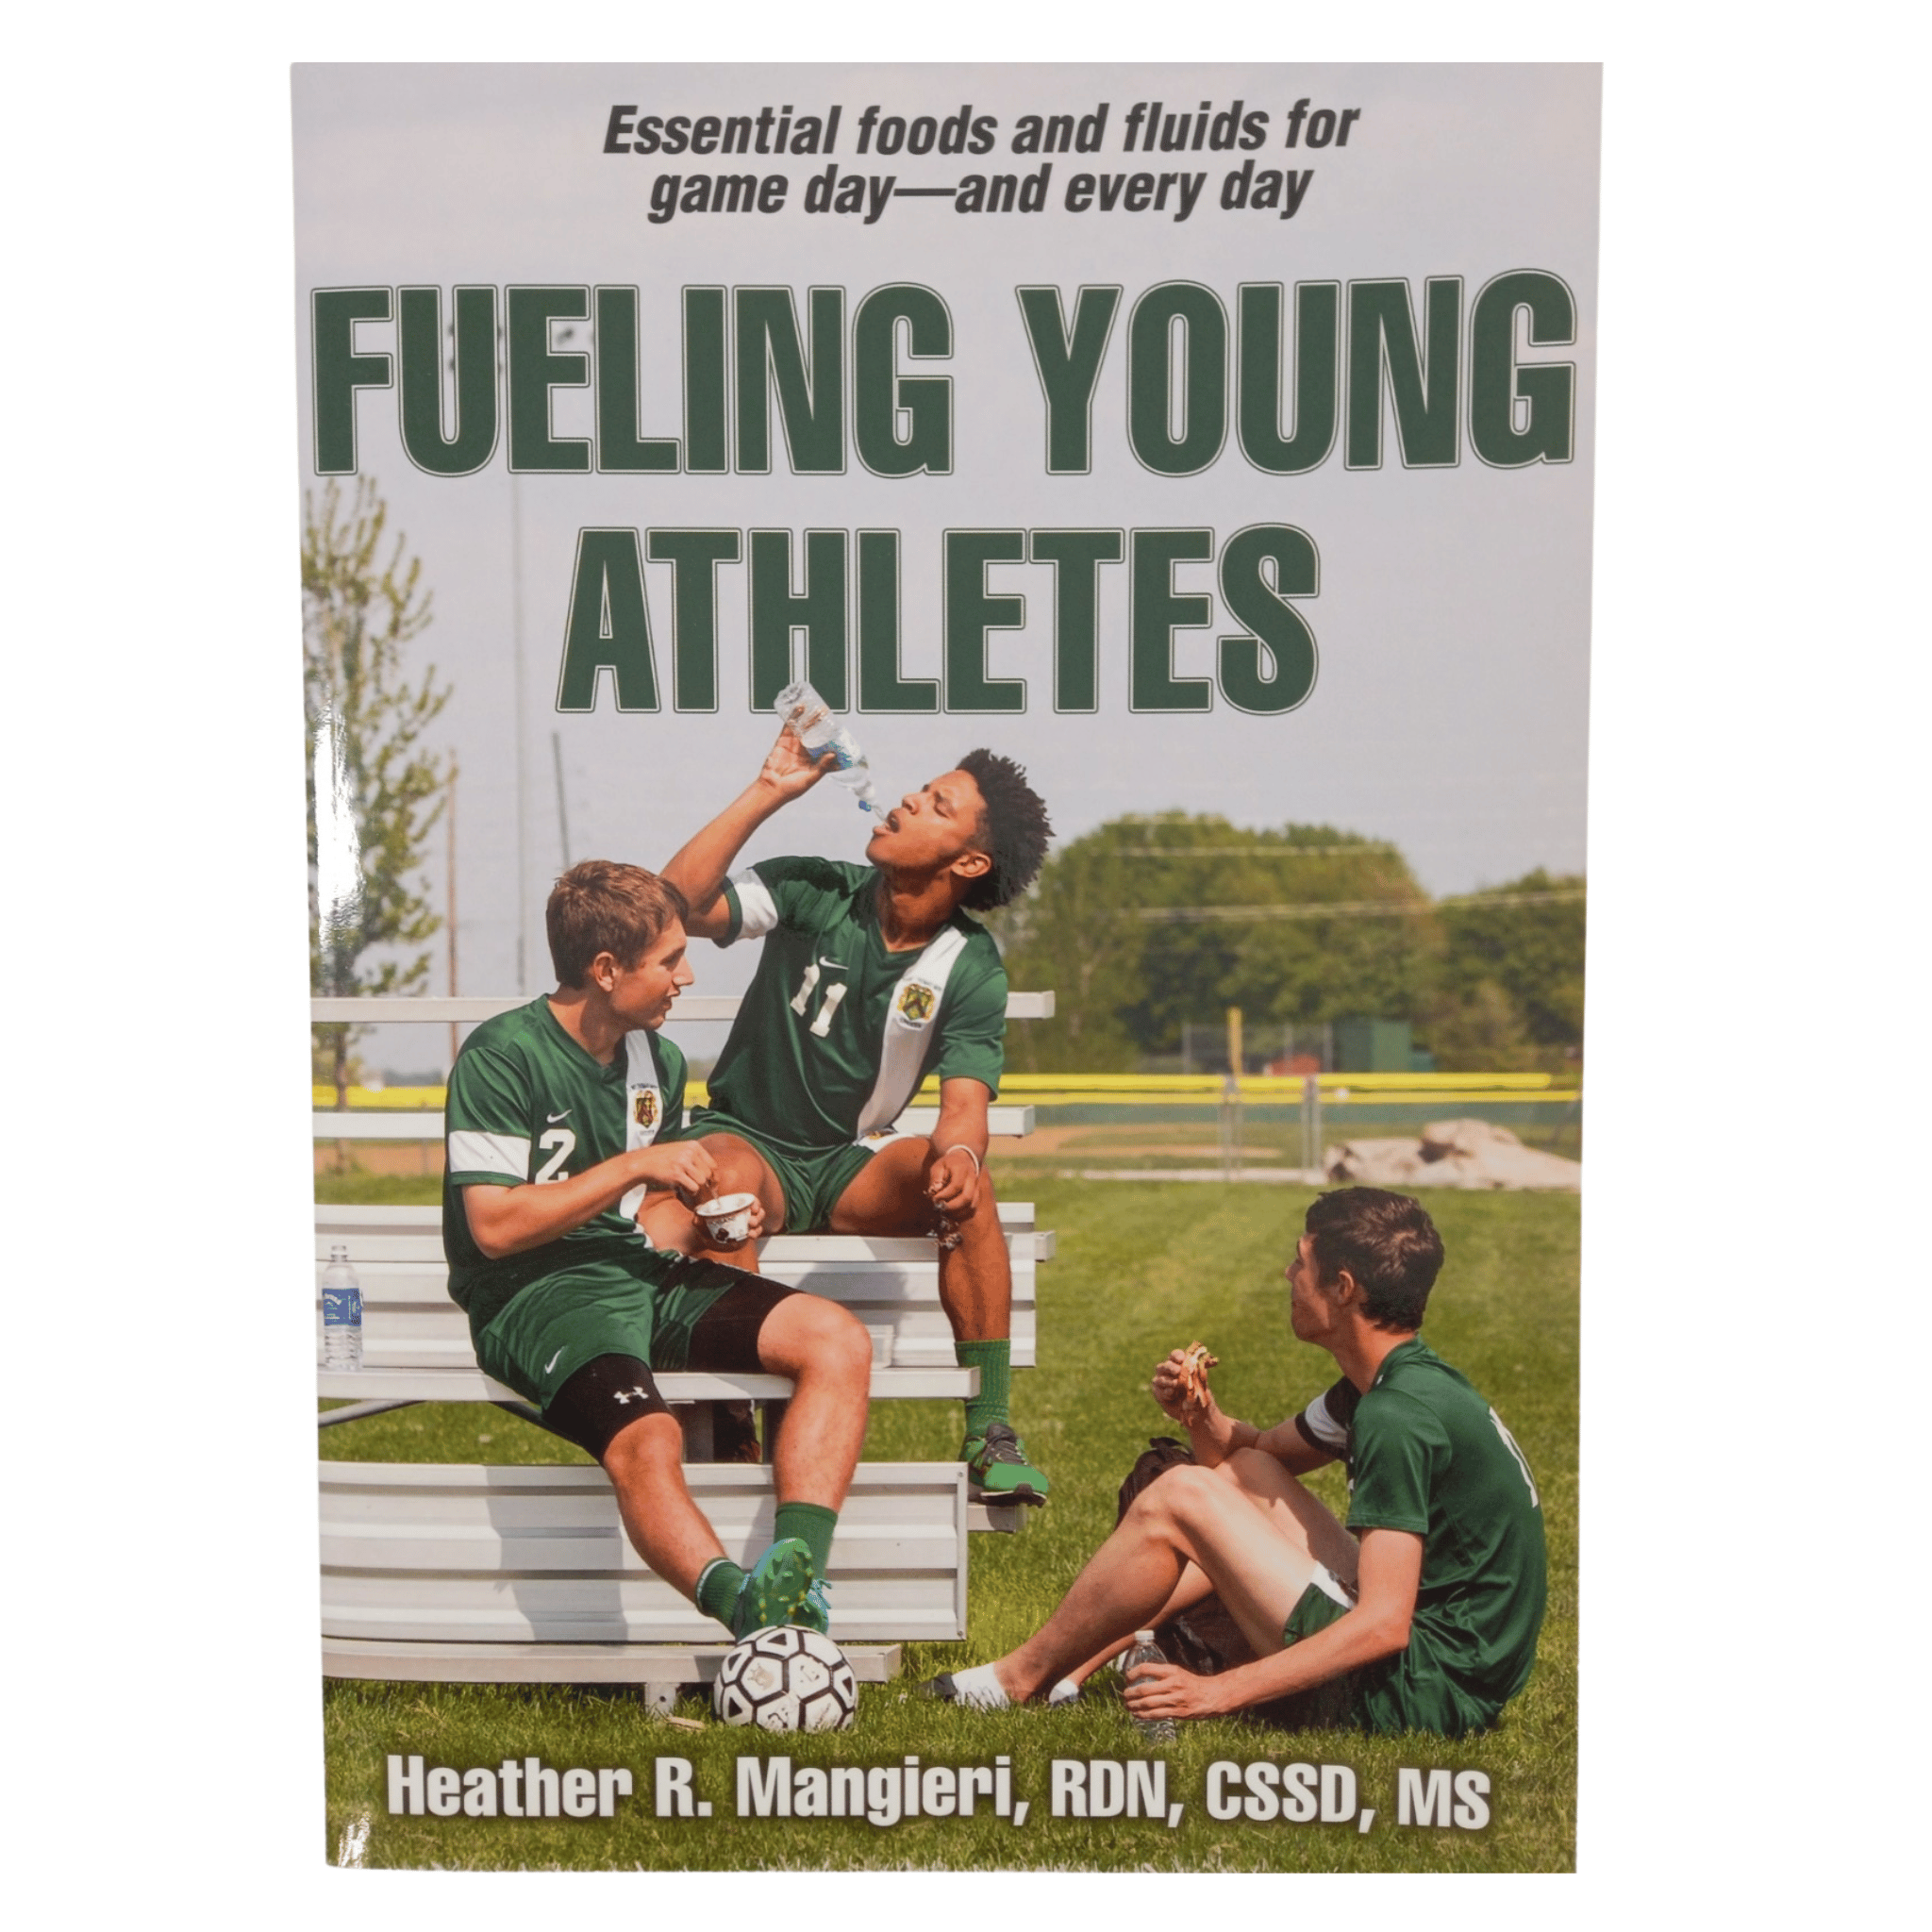 Fueling Young Athletes | Book | Manieri